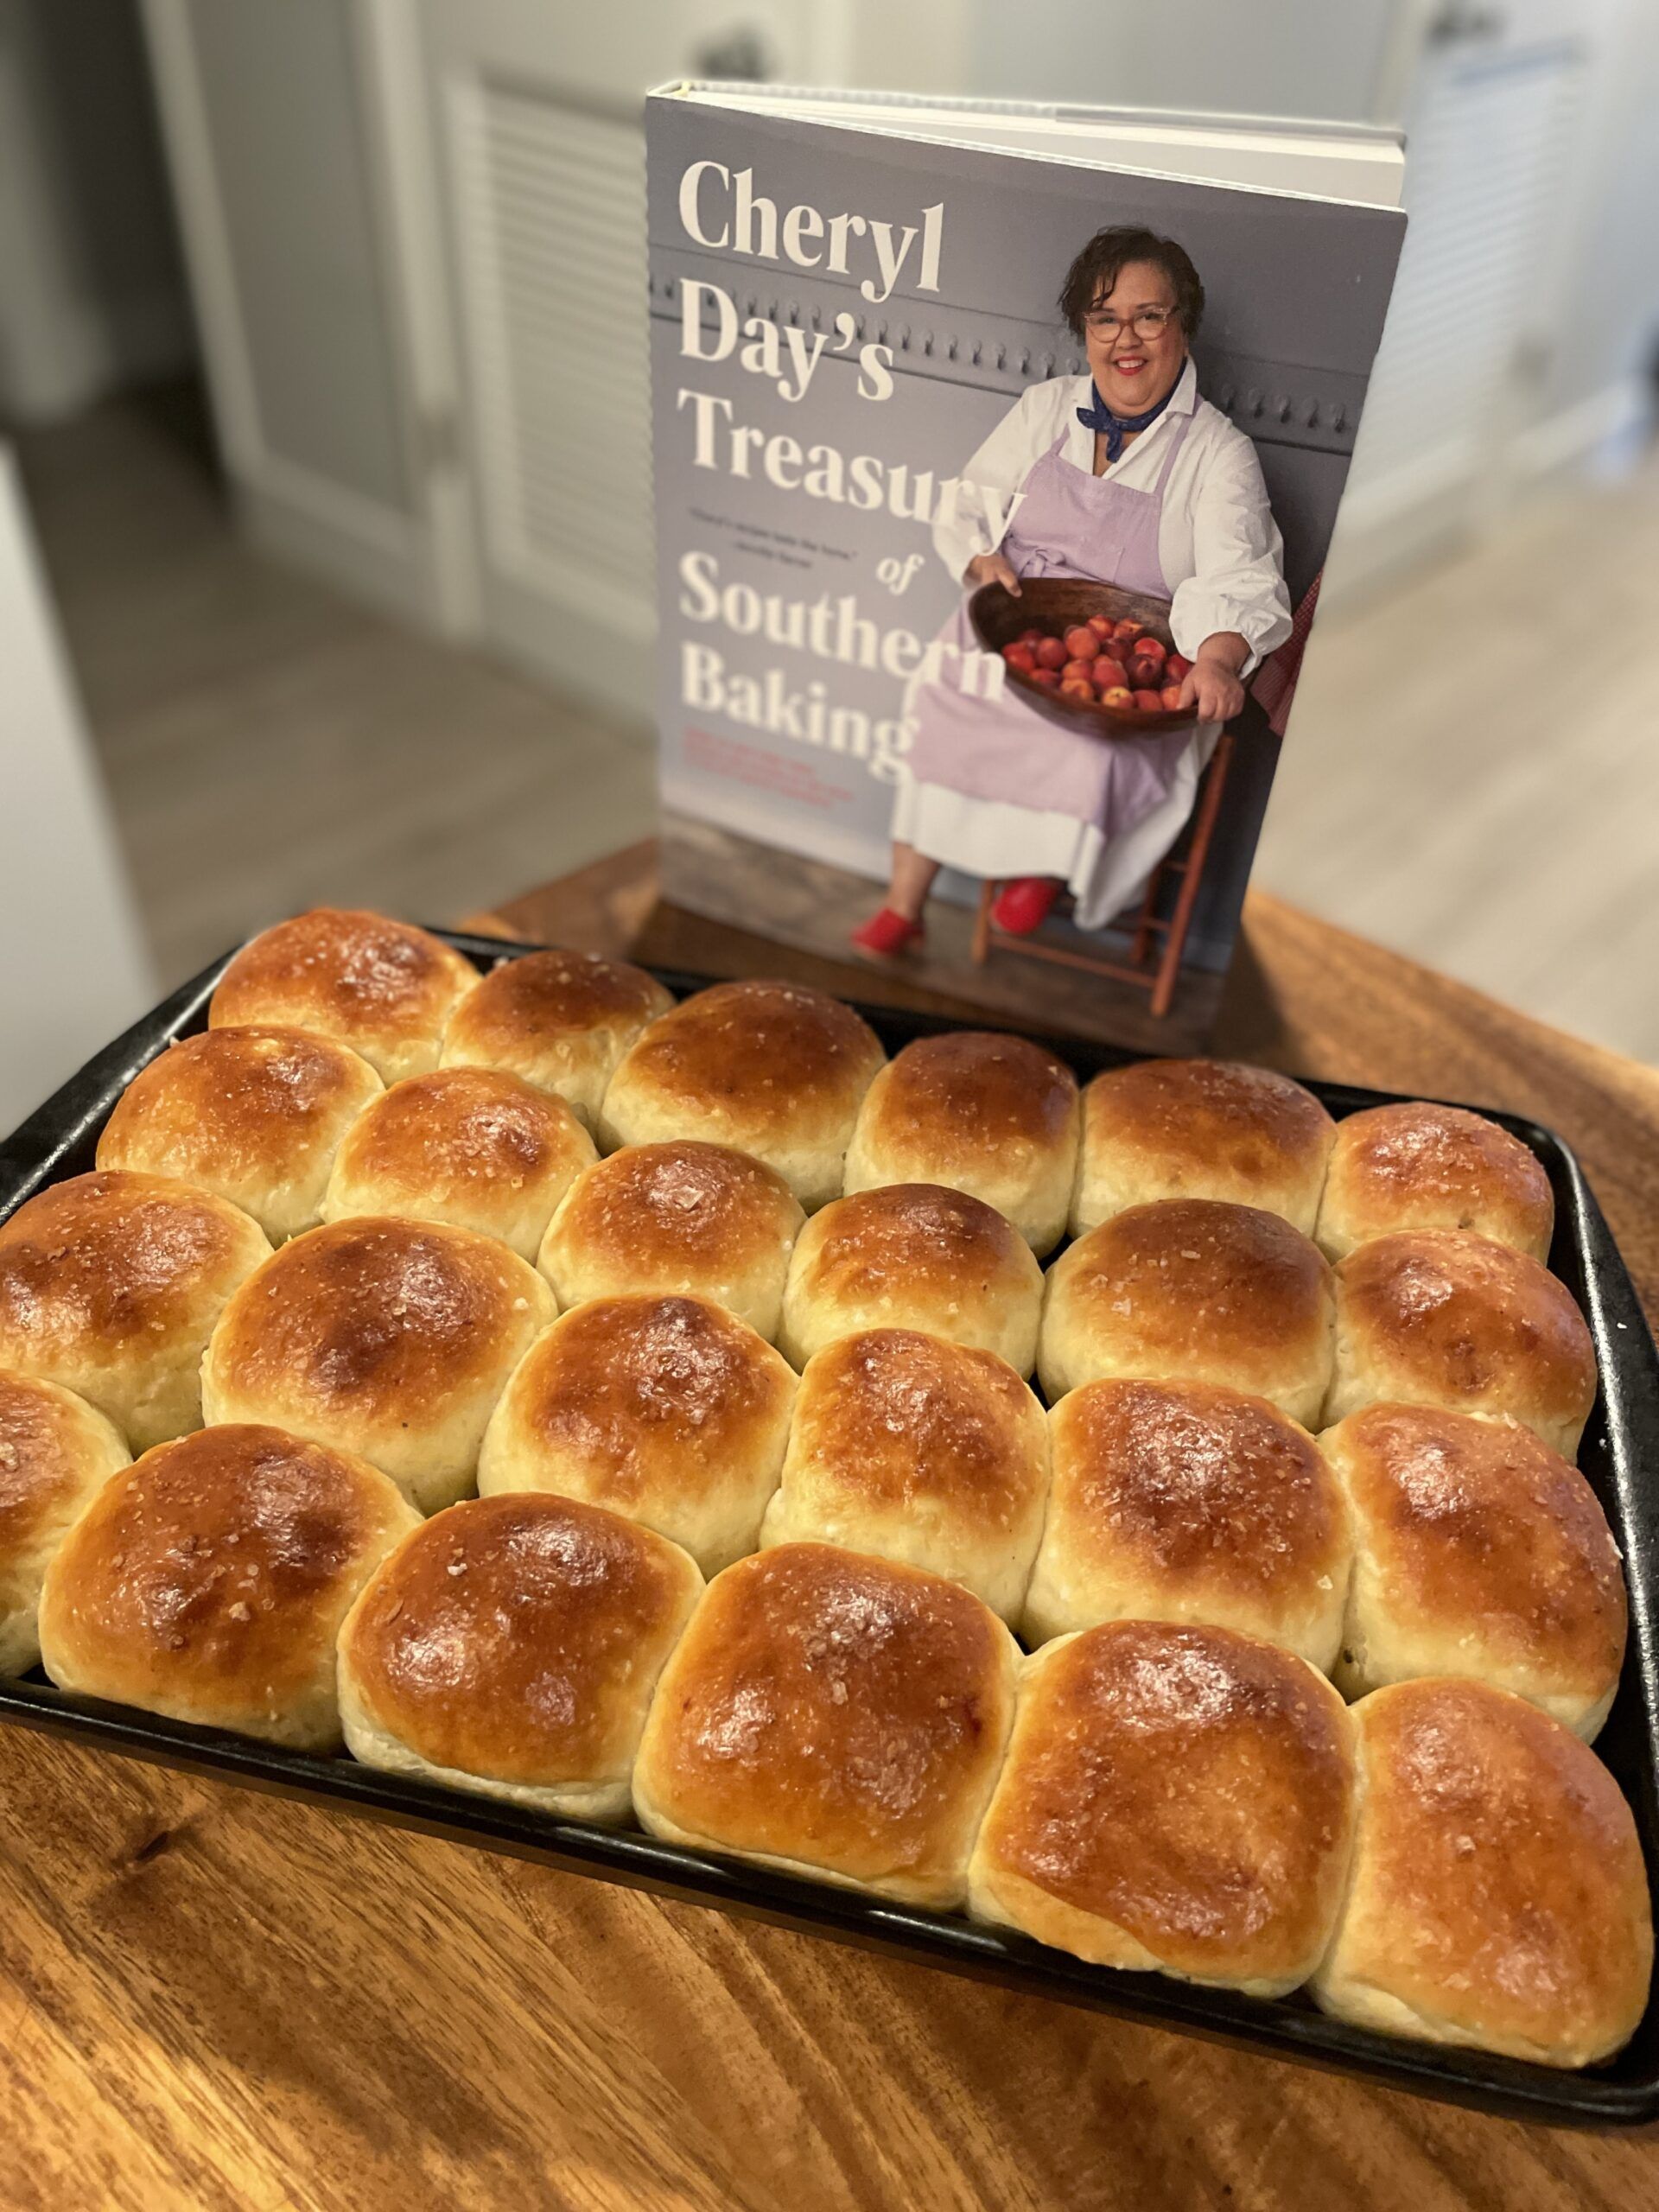 A pan of deep golden dinner rolls in front of the cookbook Cheryl Day's Treasury of Southern Baking